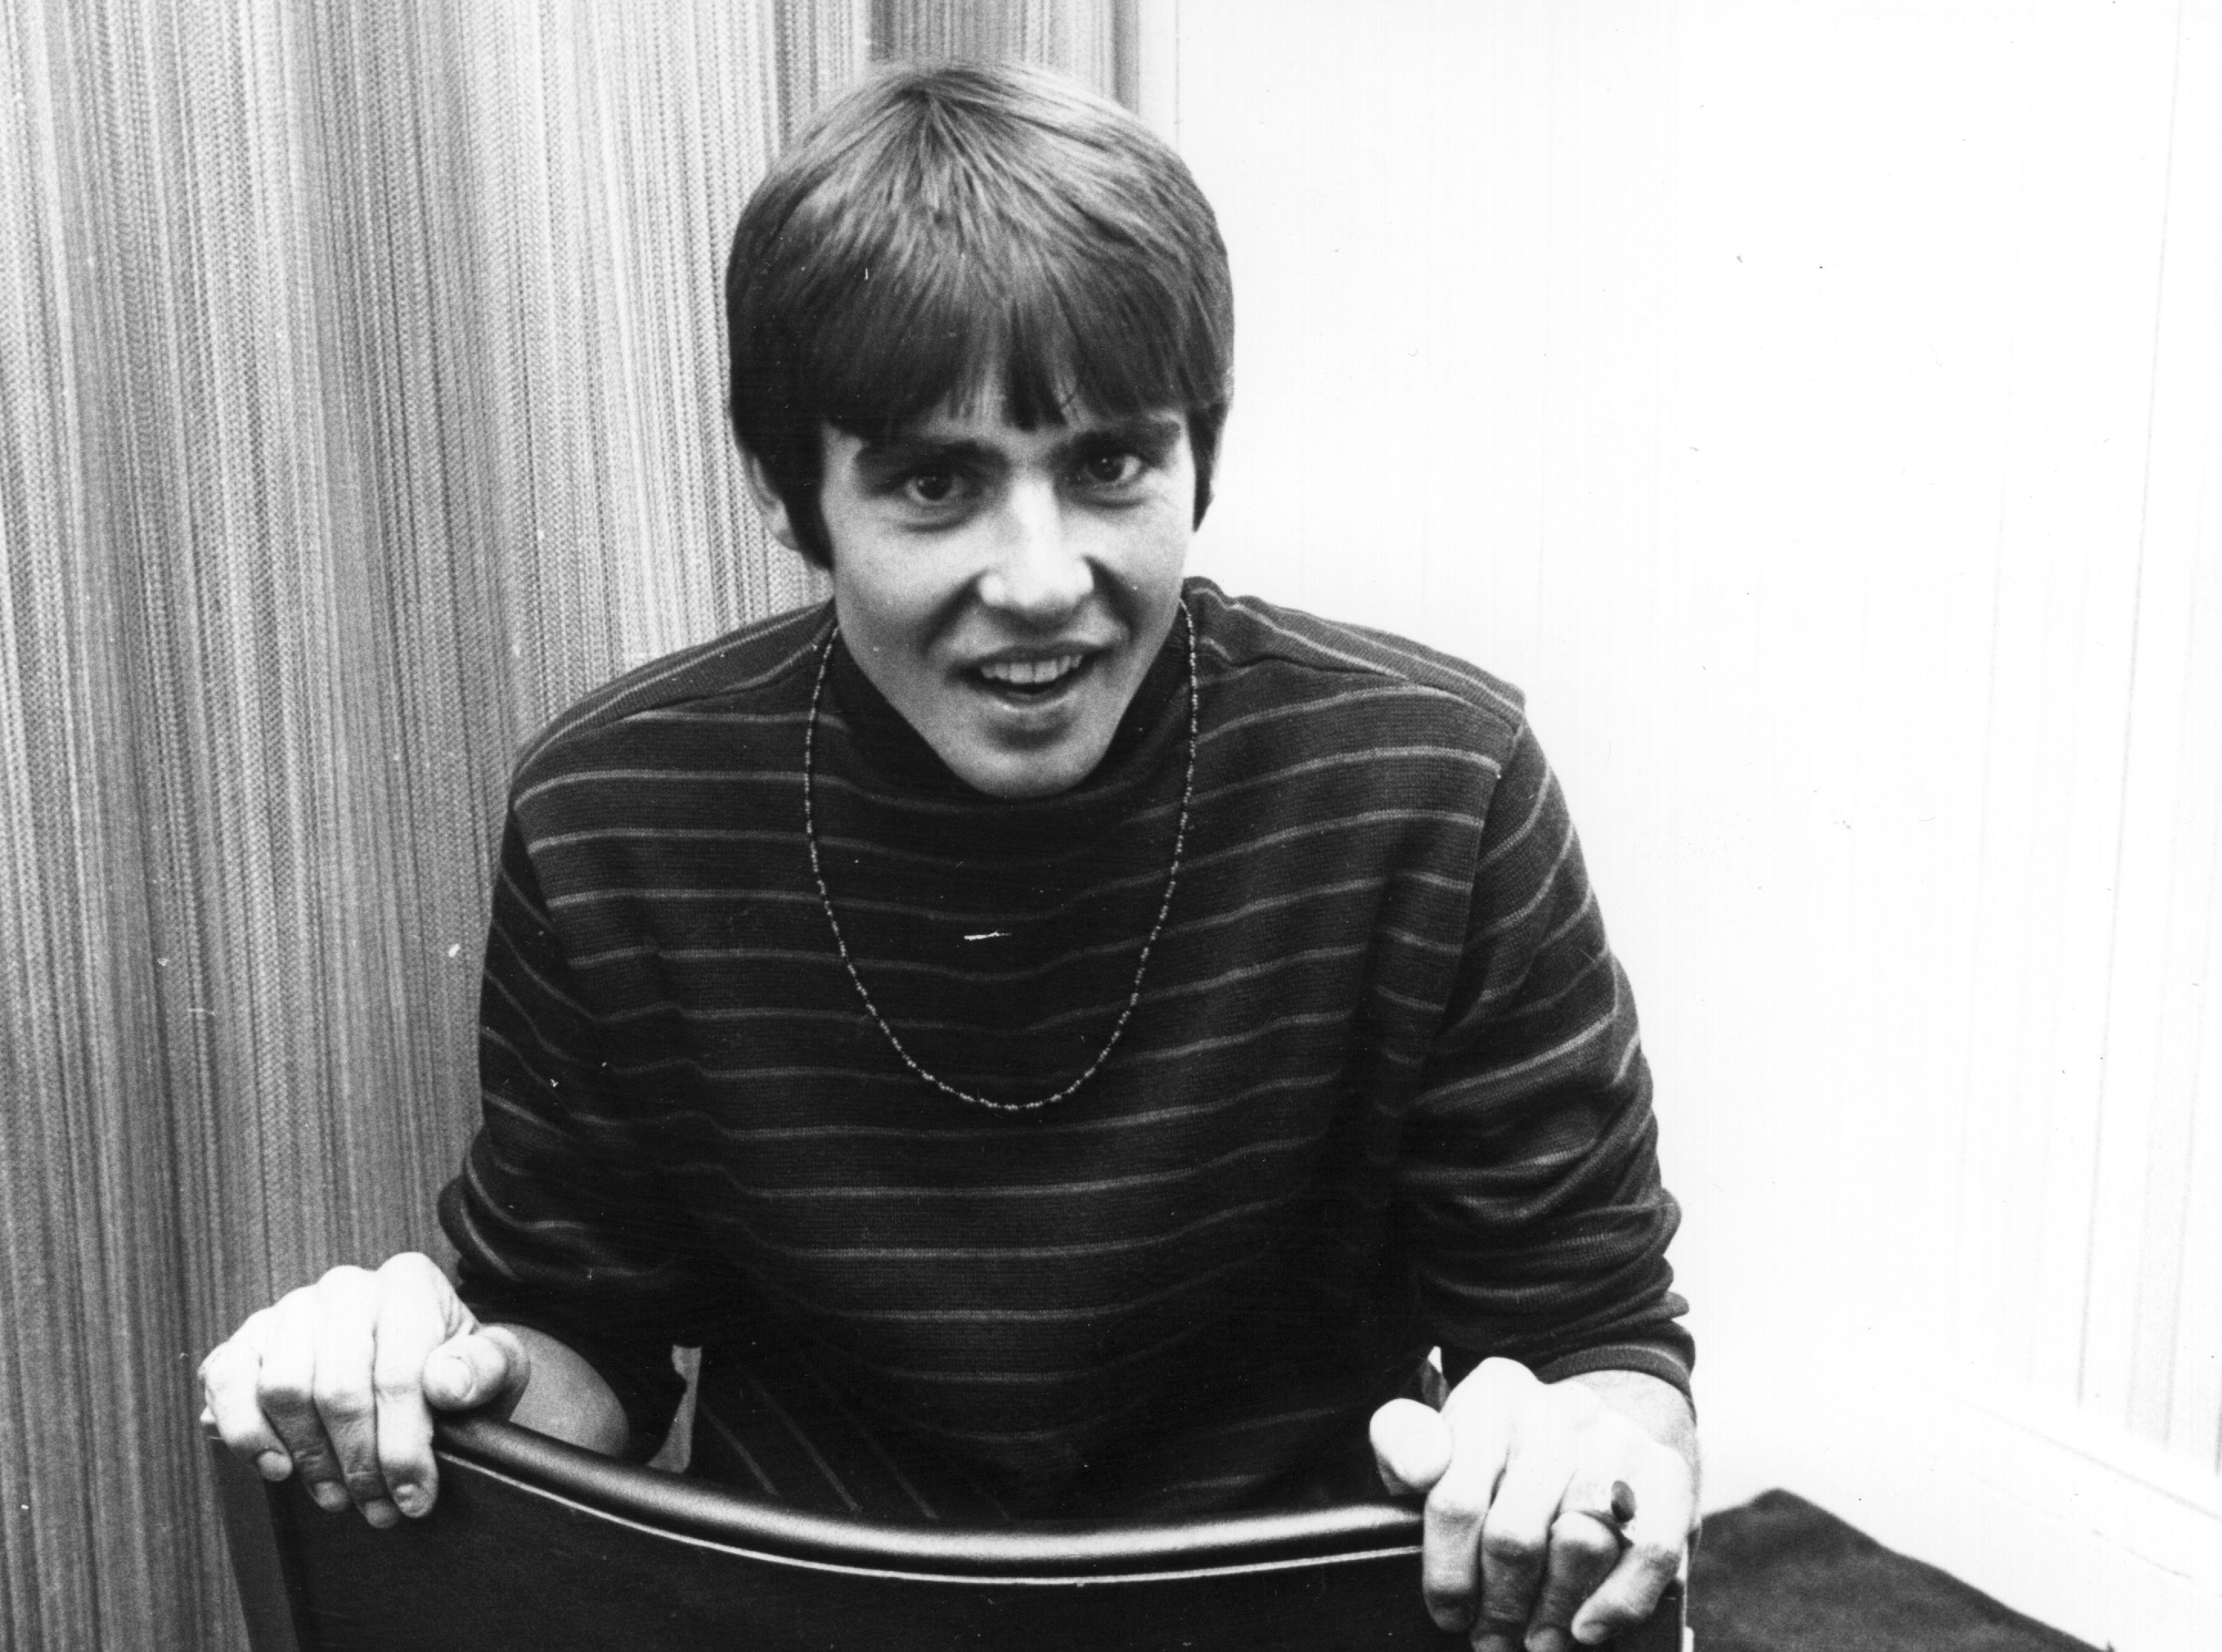 The Monkees' Davy Jones in front of a curtain